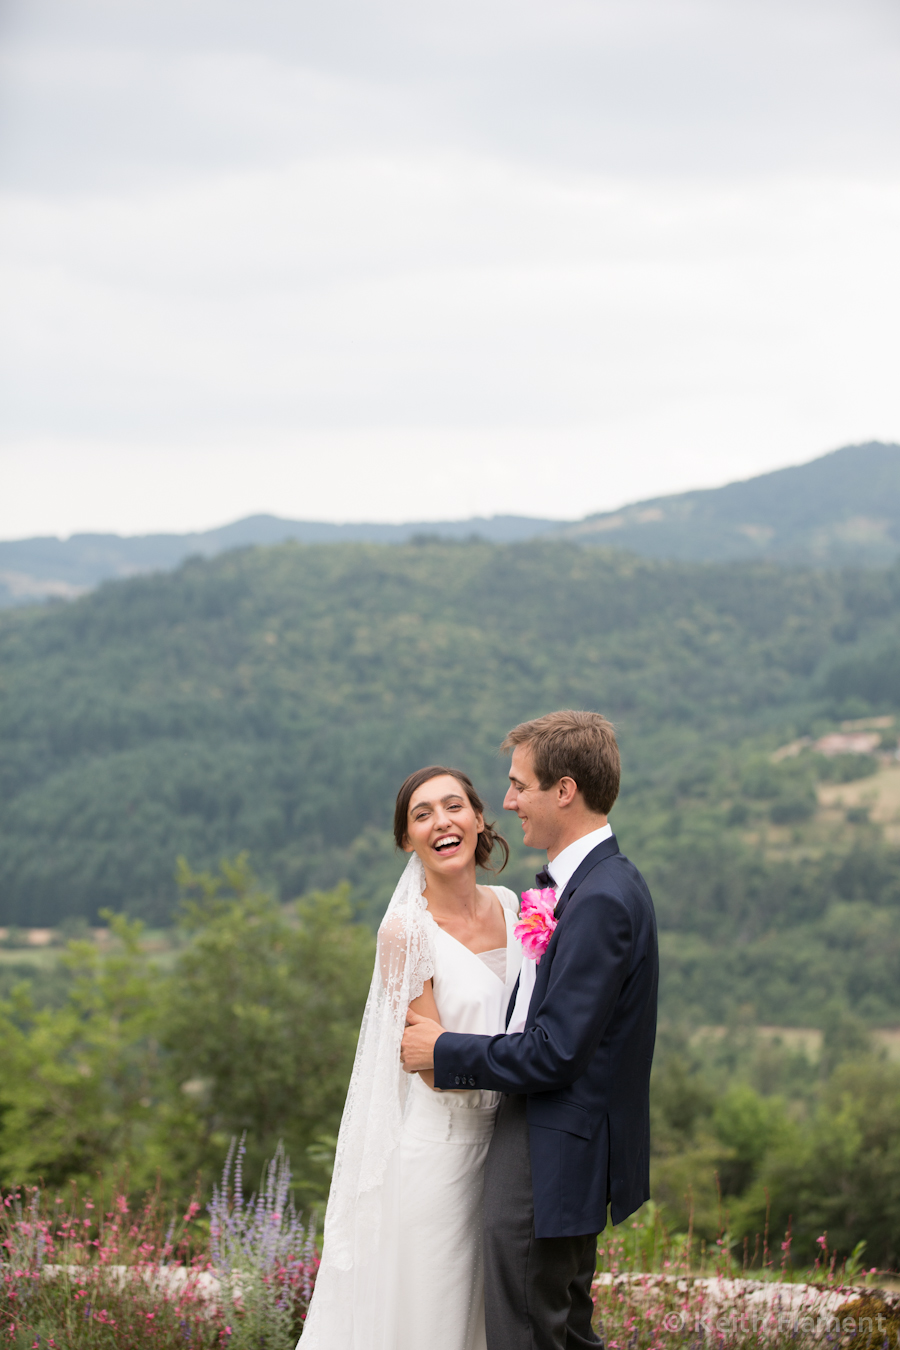 keith-flament-photographe-reportage-mariage-ardèche-114